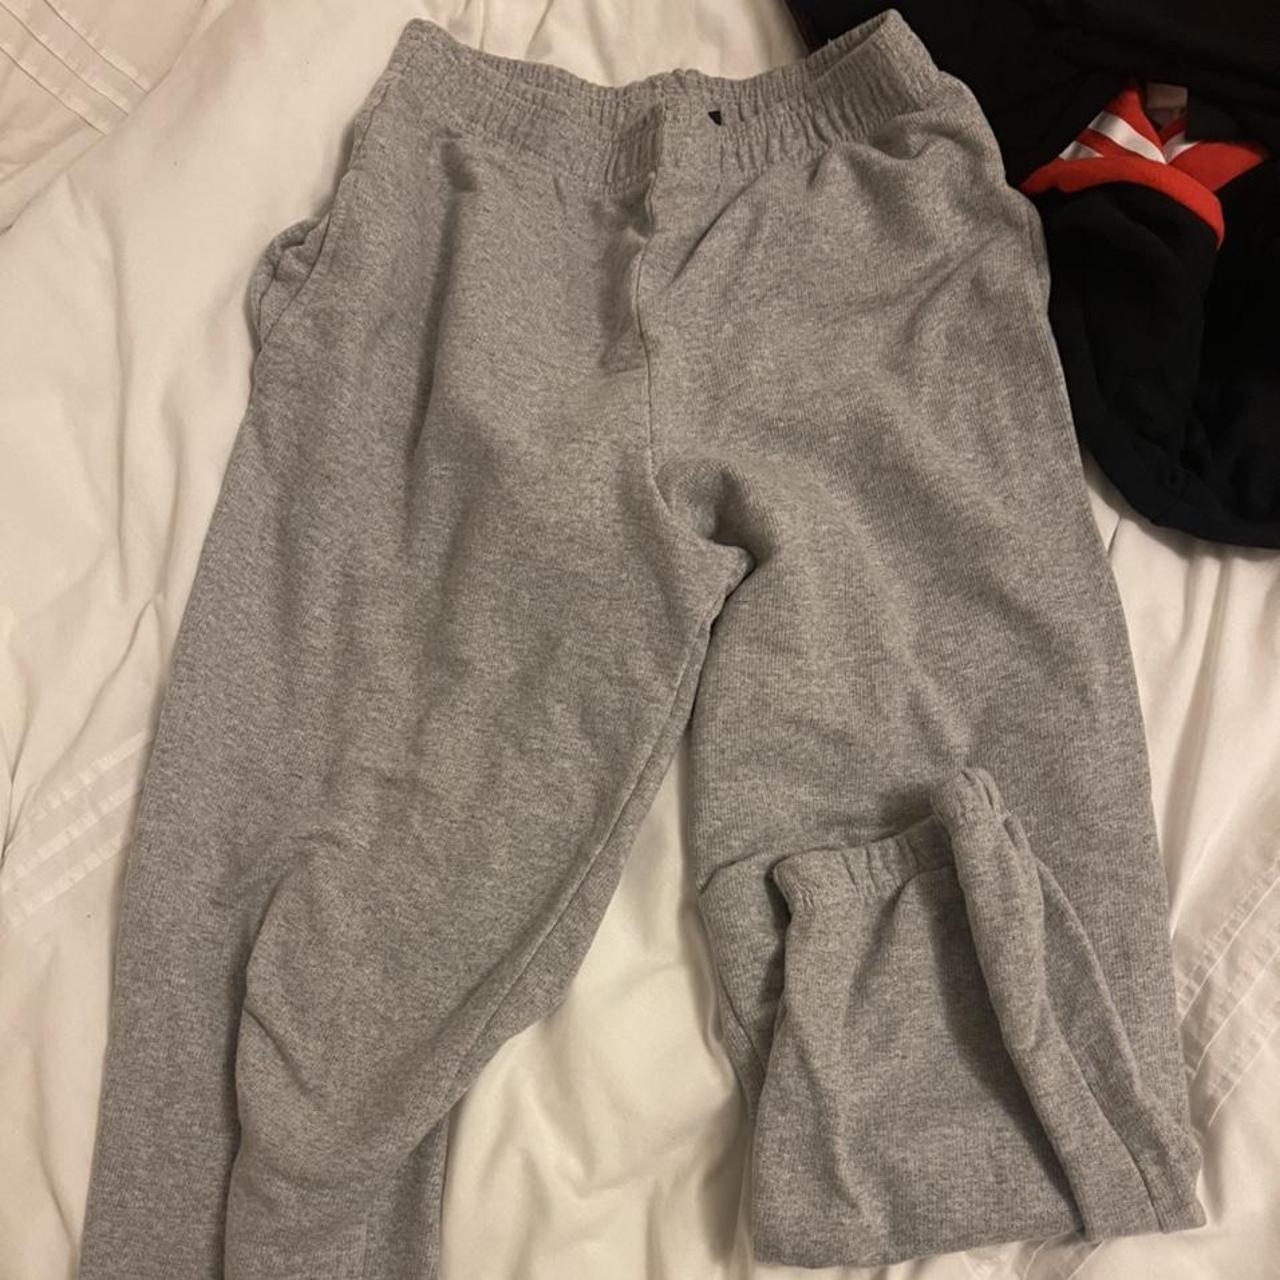 Grey isawitfirst joggers Brand new size S Would... - Depop